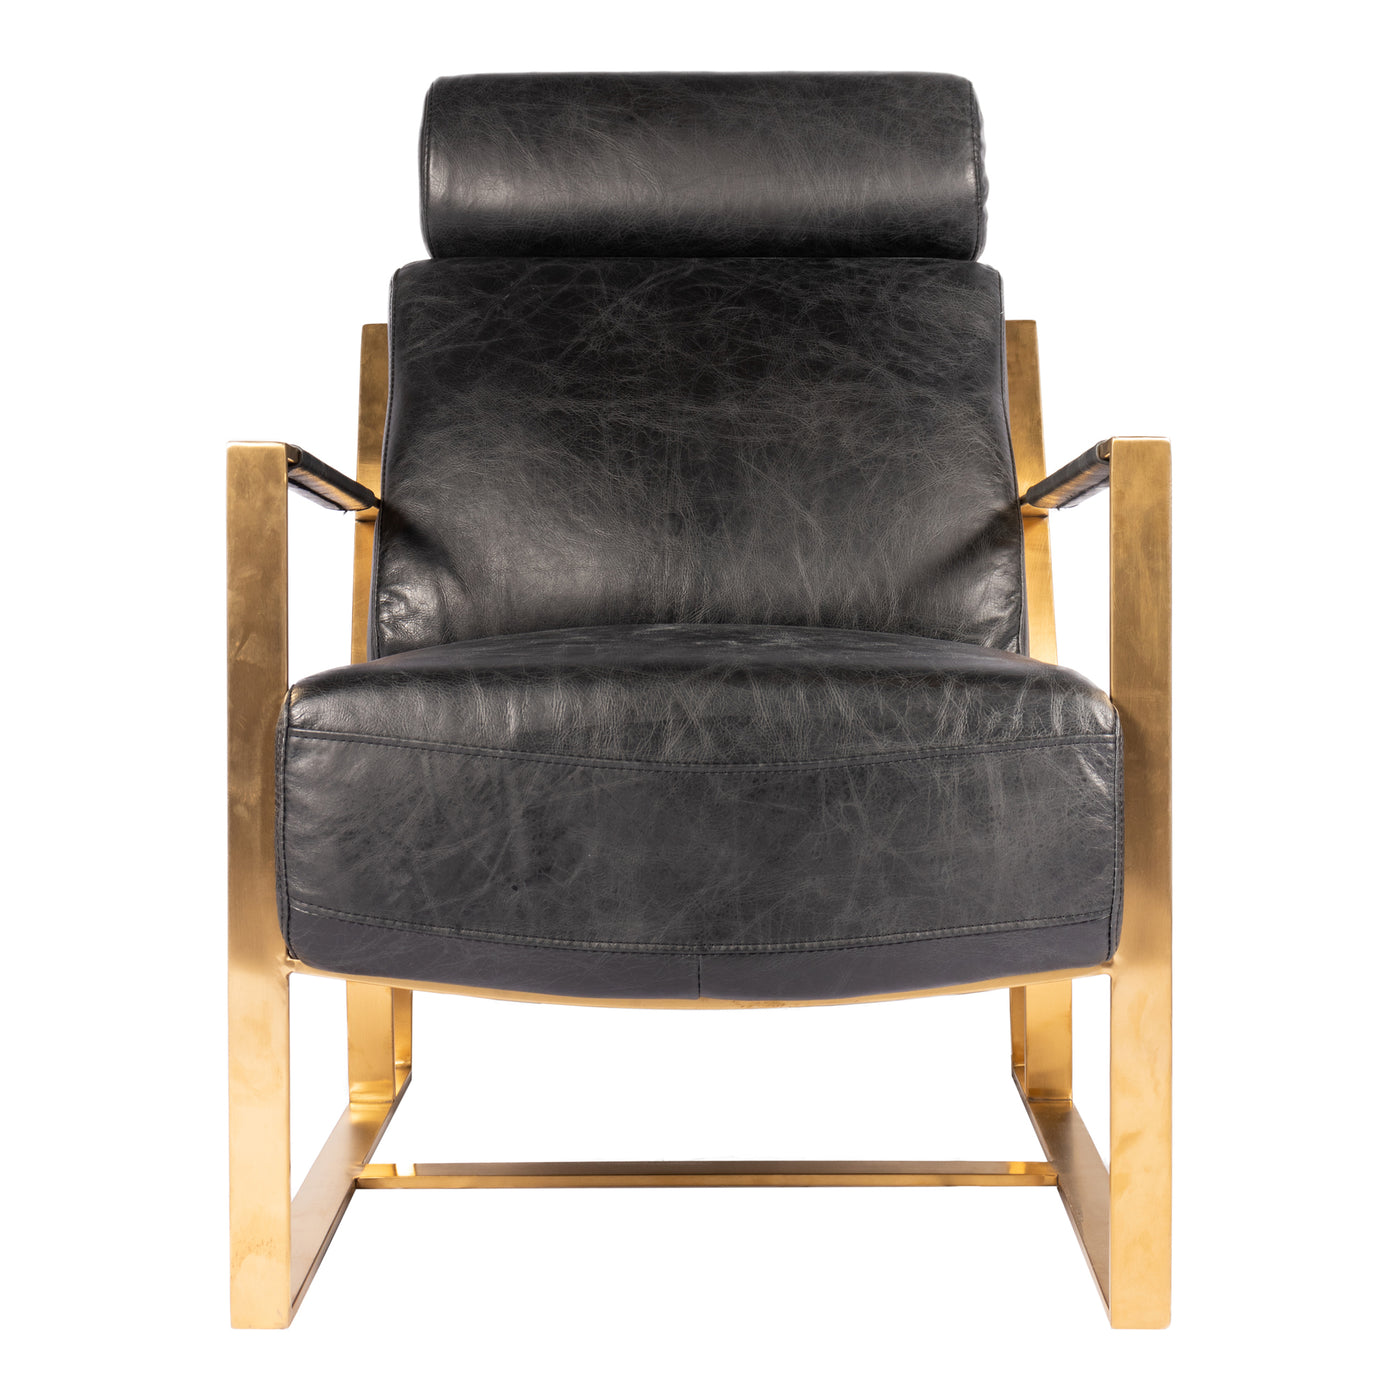 The perfect occasional chair for designers, fashionistas, and rock stars. Accented with a gold-finished frame and rustic, ...